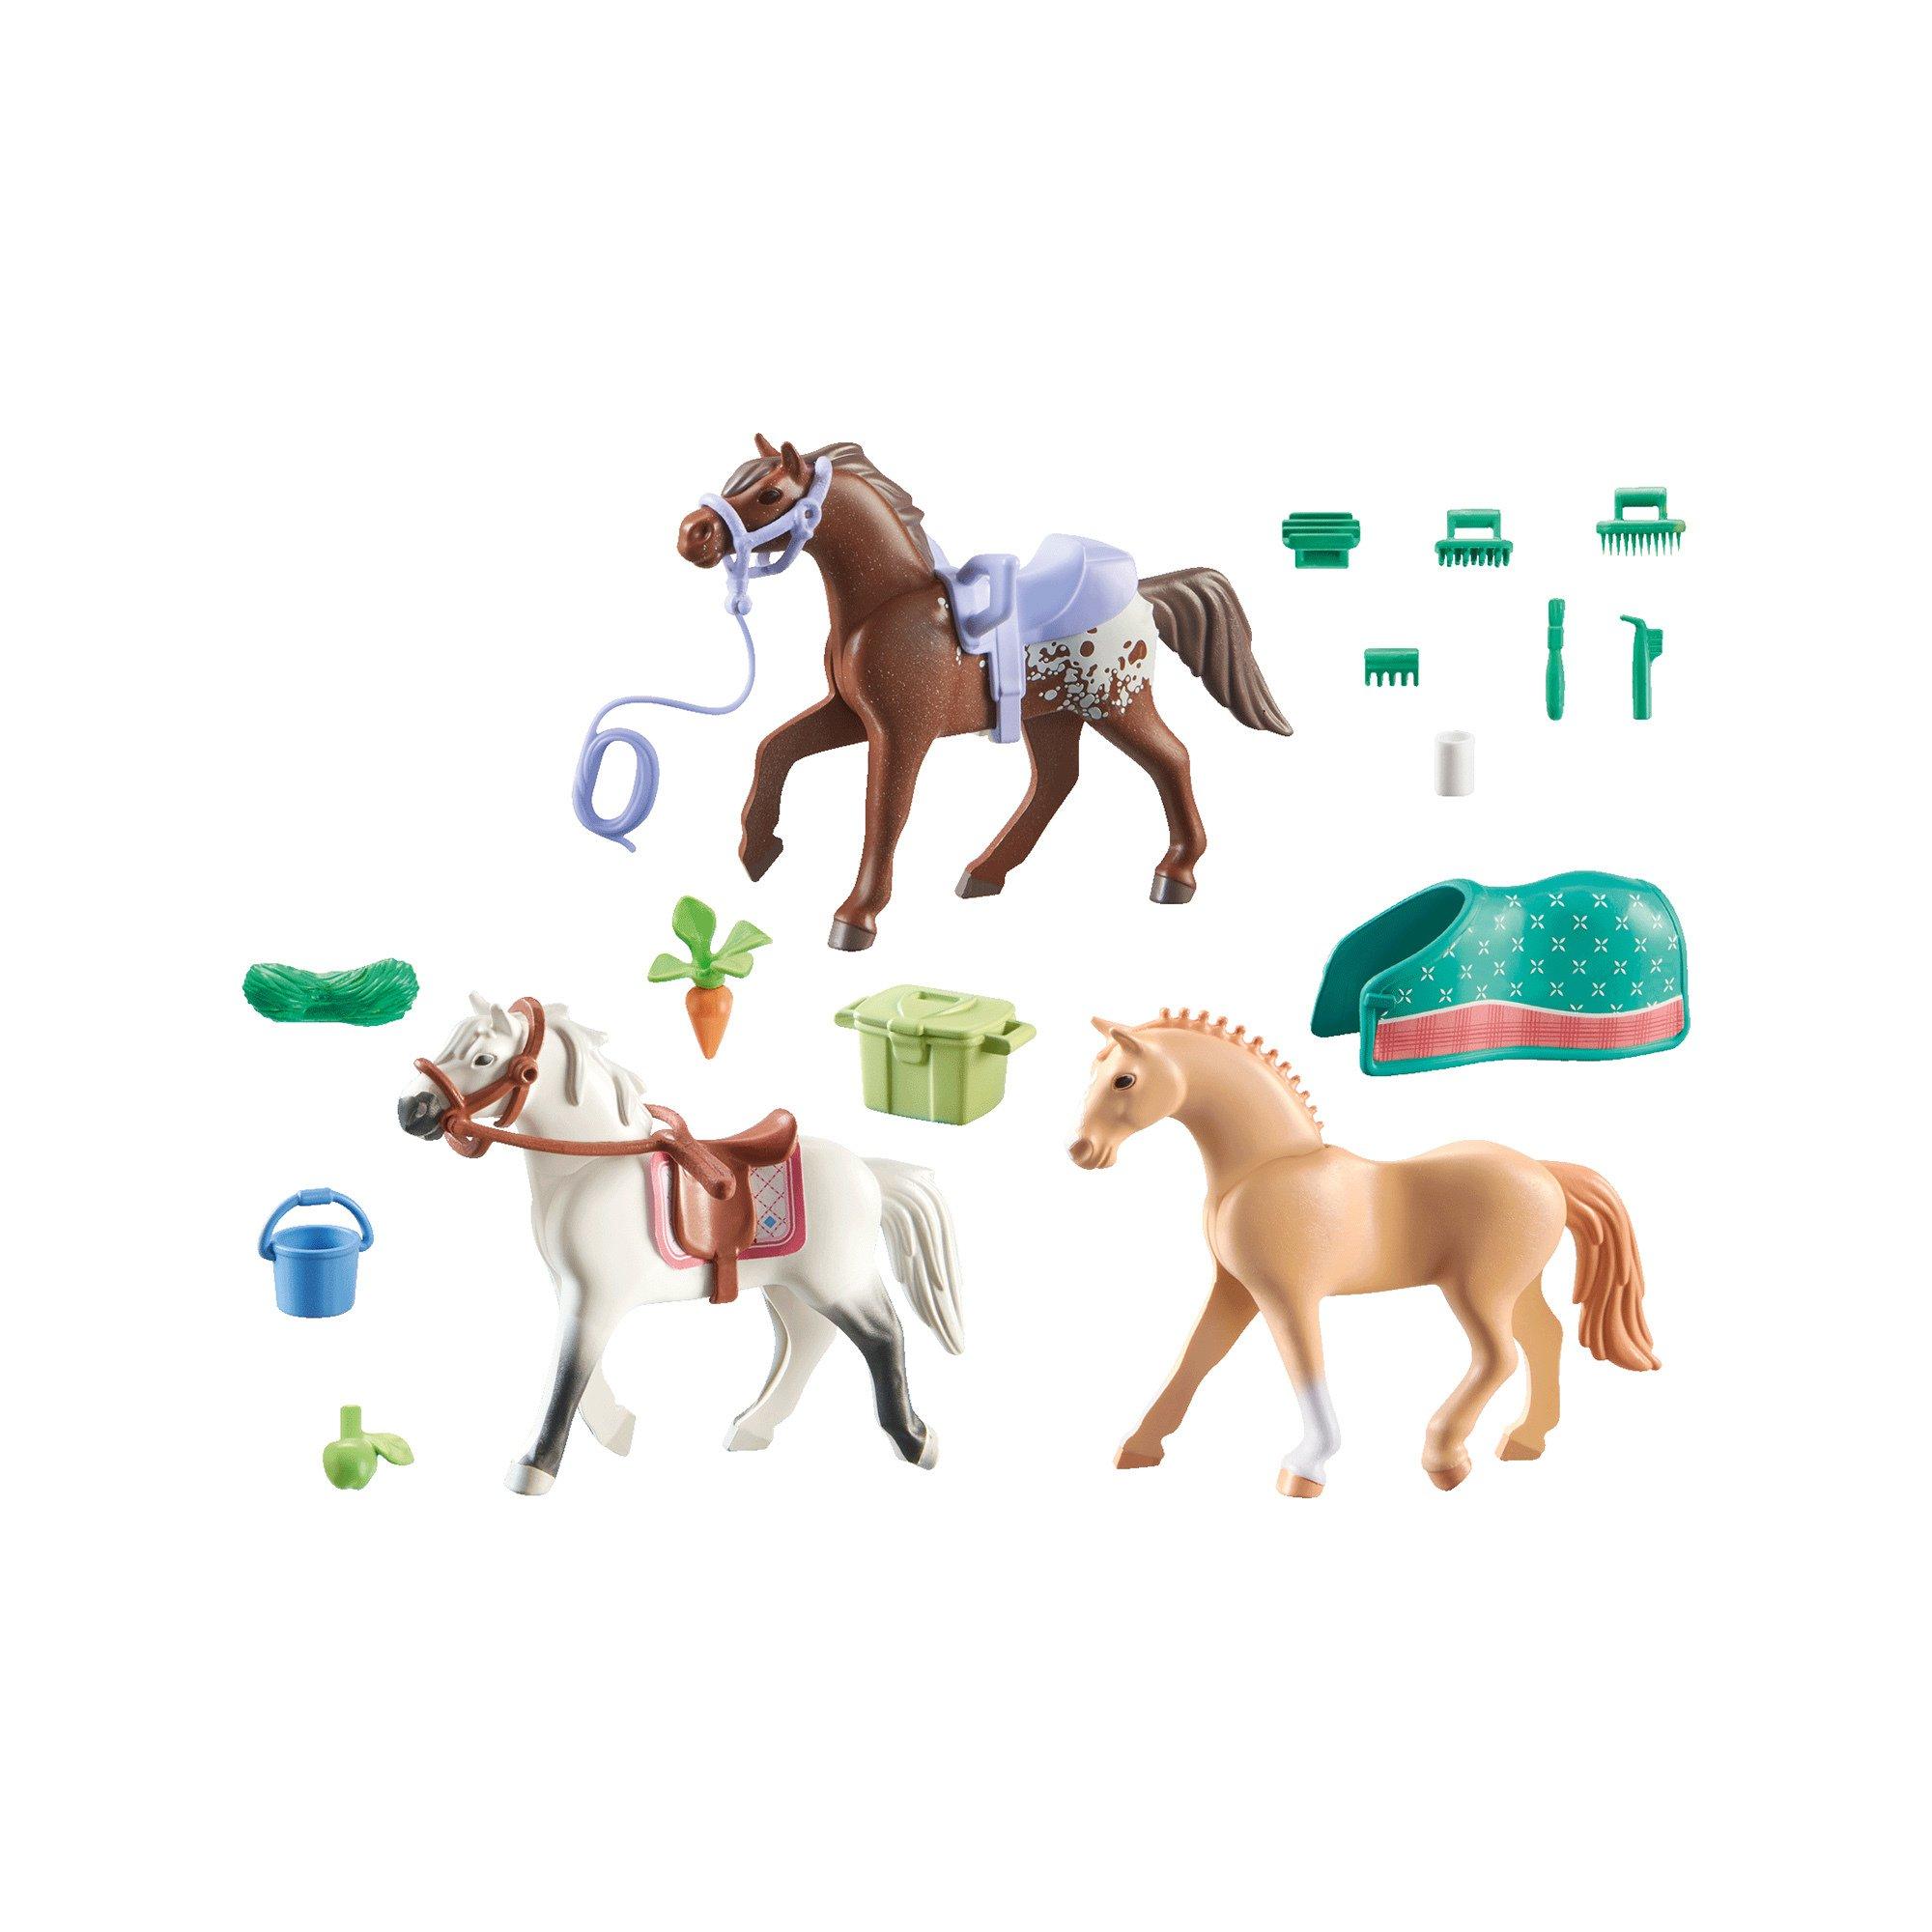 Playmobil  71356 Horses of Waterfall - 3 chevaux 